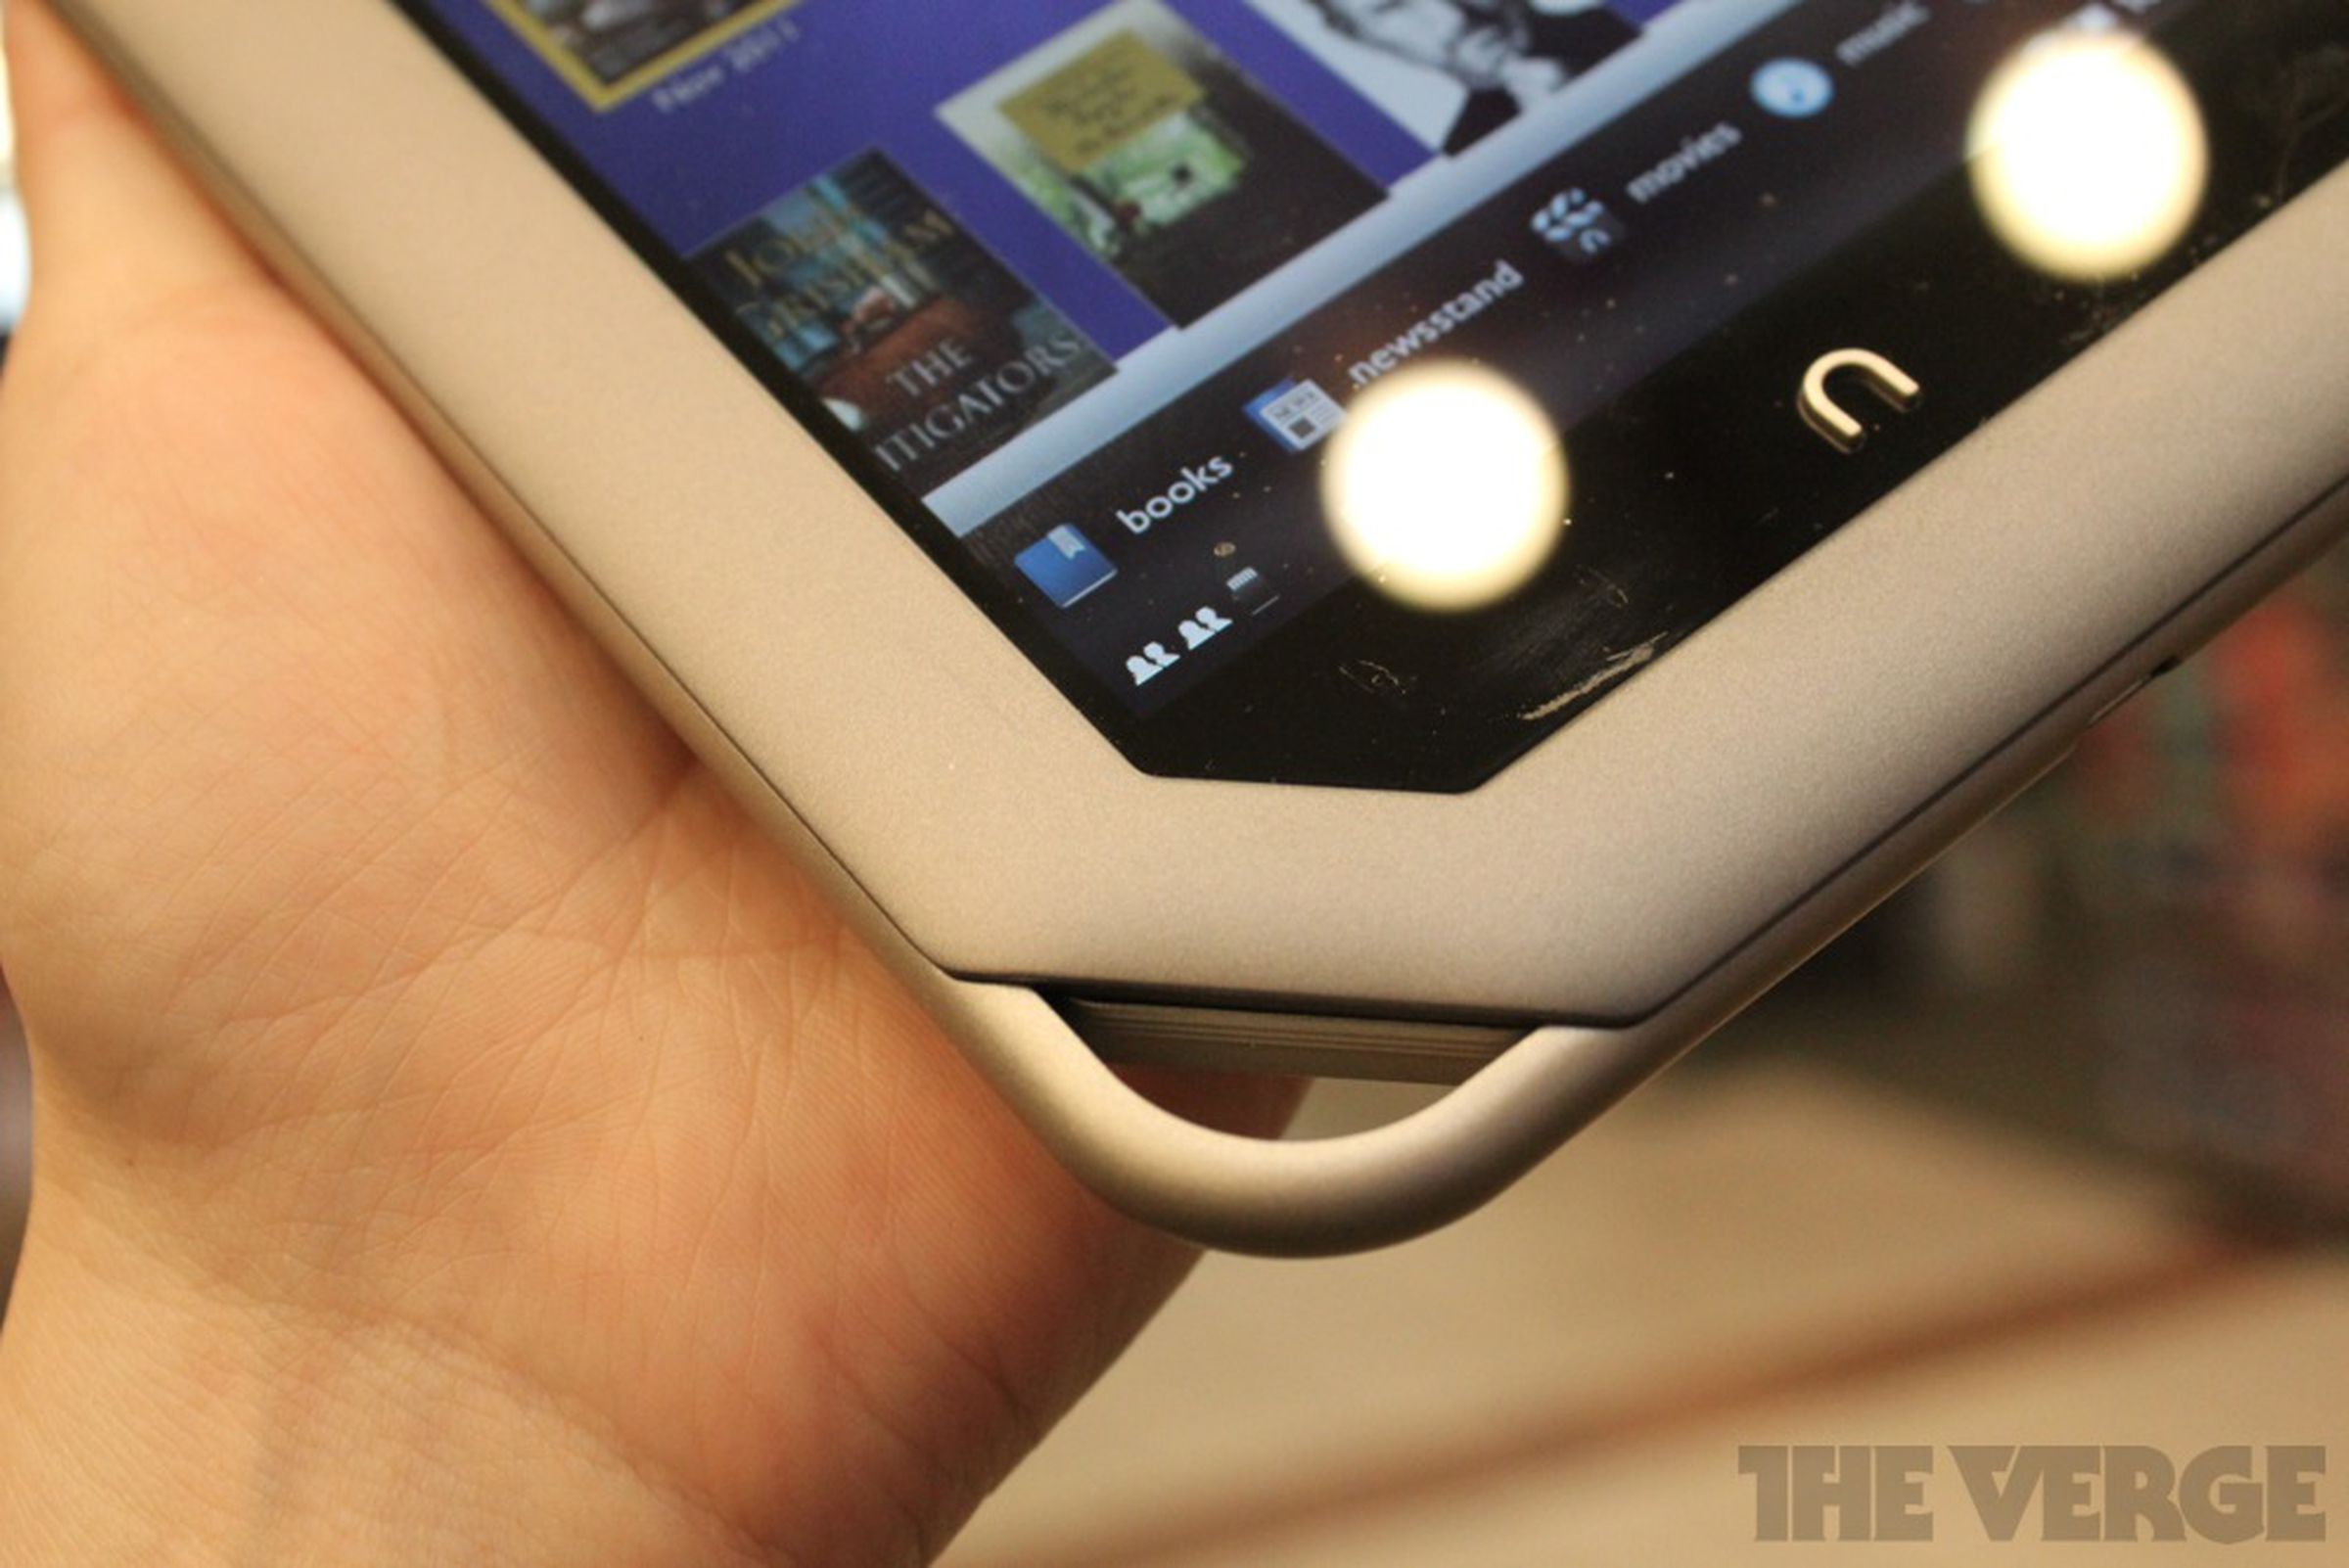 Barnes & Noble Nook Tablet hands-on pictures 